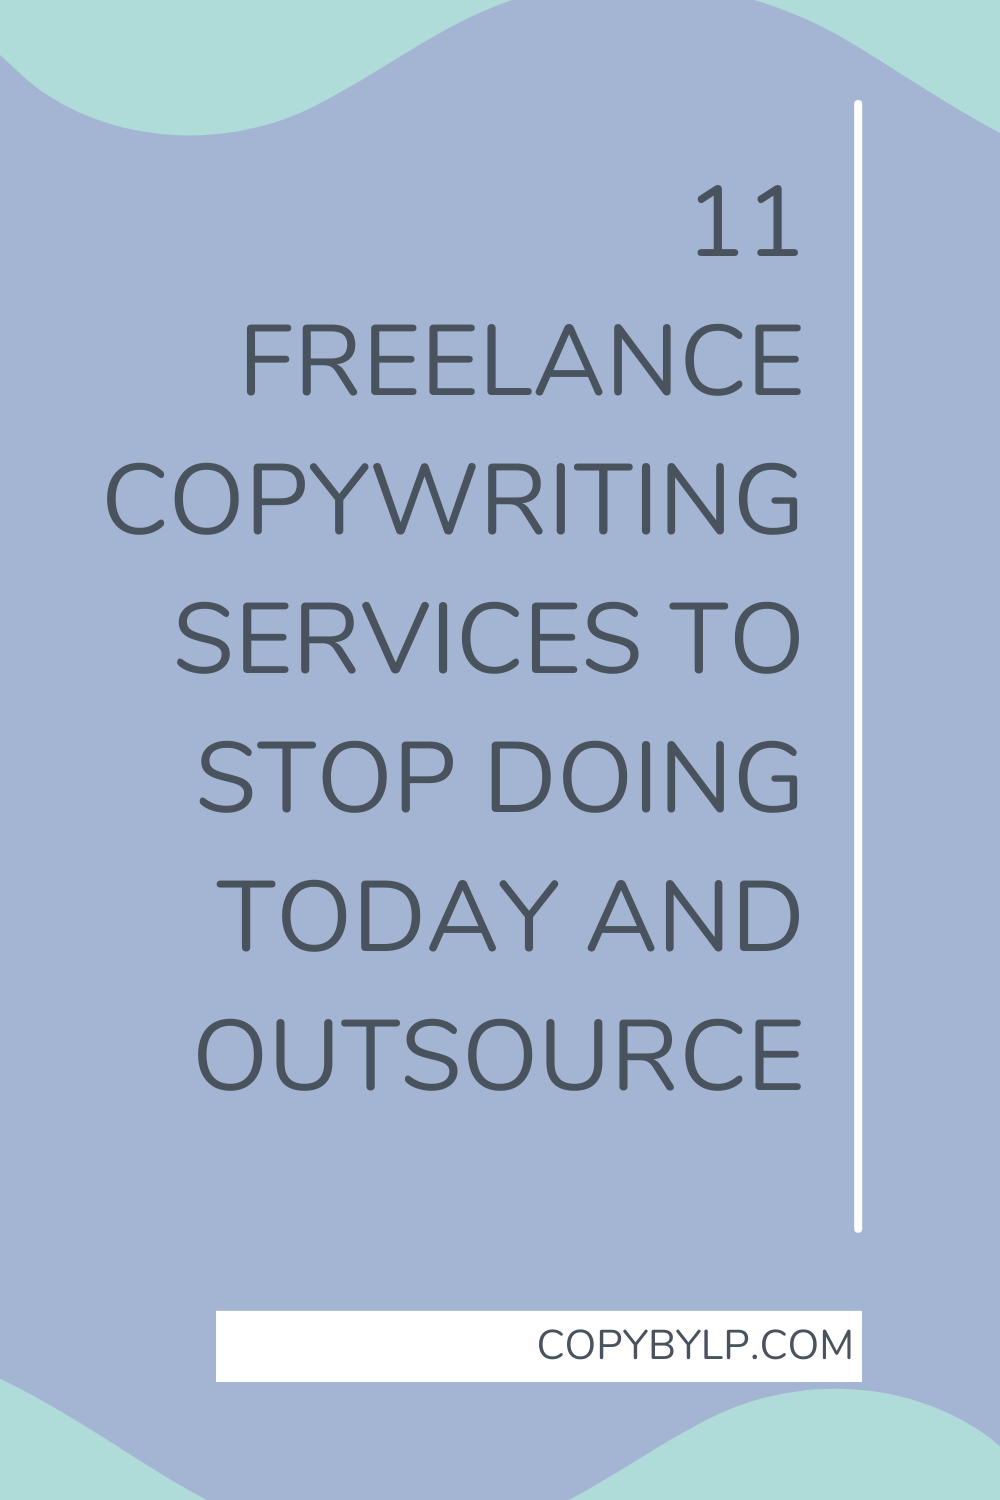 11 freelance copywriting services to stop doing today and outsorce